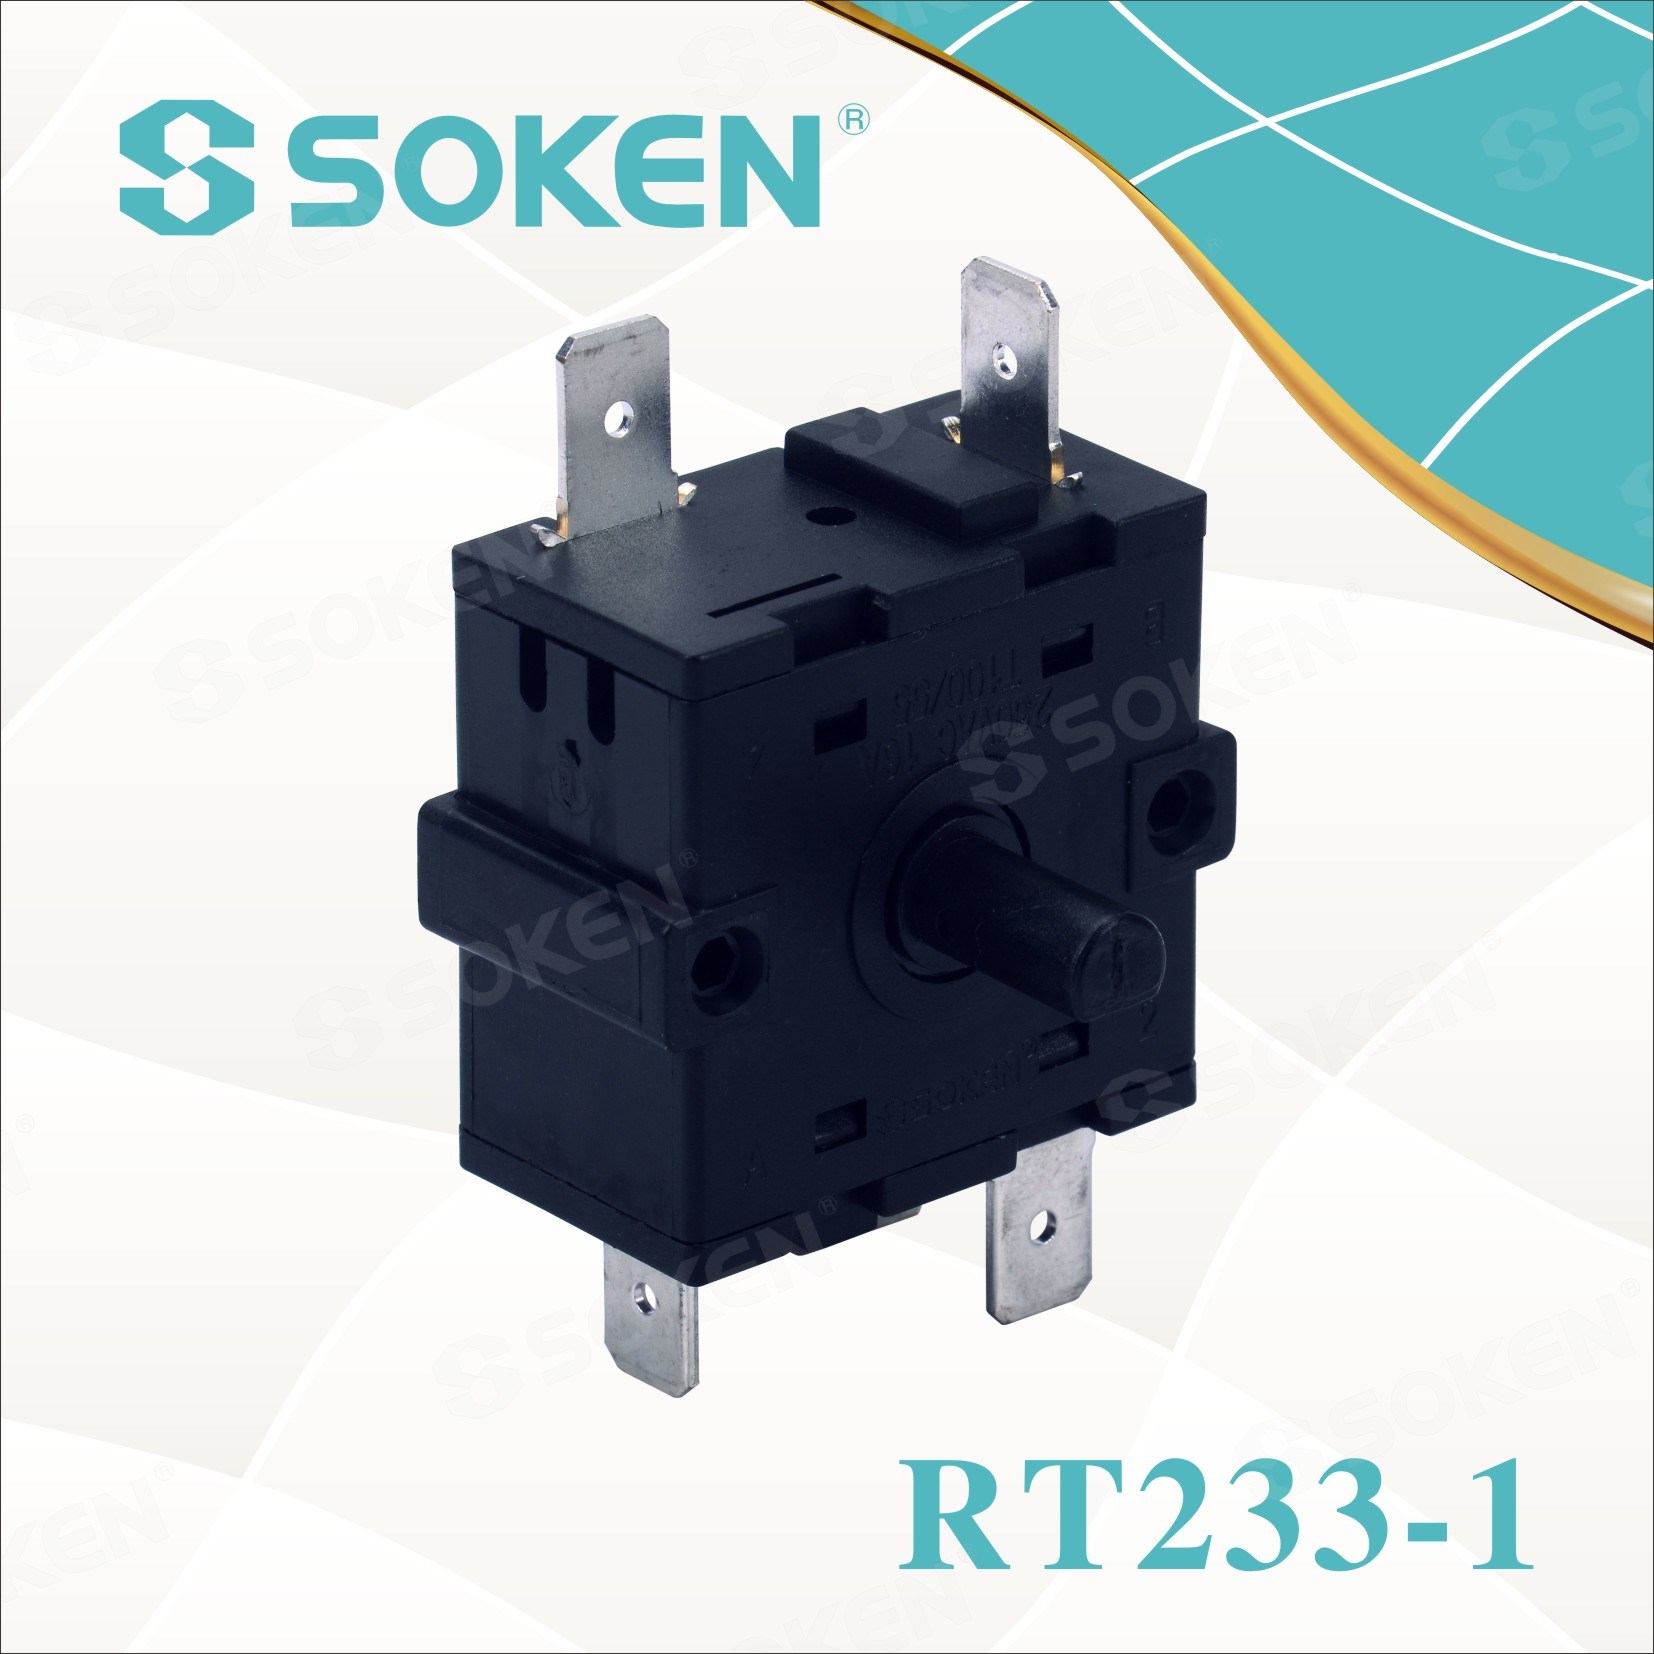 Competitive Price for 3speed Fan Switch - Soken 4 Position Oven Rotary Switch – Master Soken Electrical